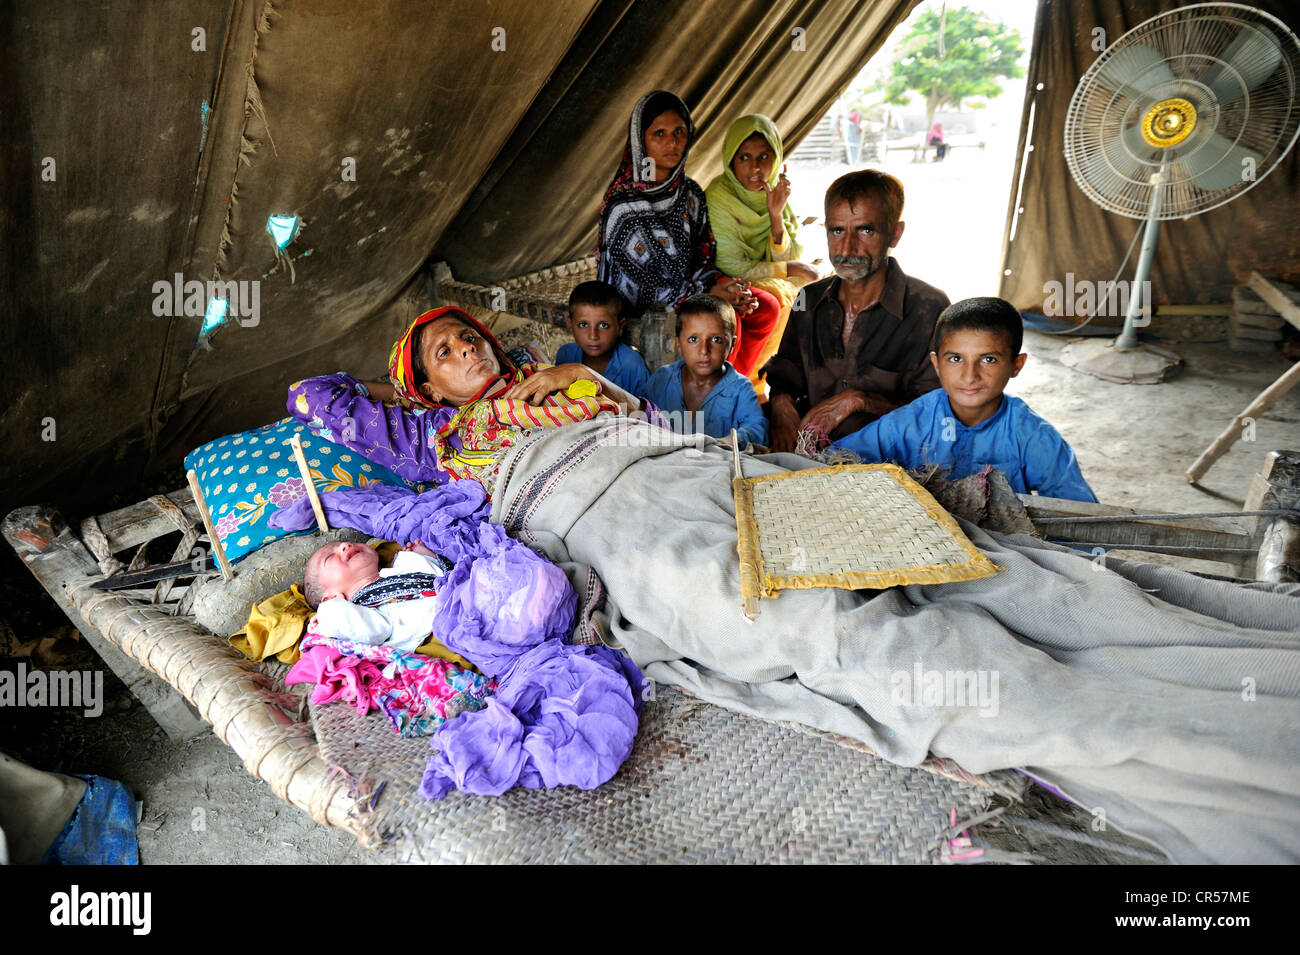 Family with newborn baby, they have been living in a tent since the flood disaster of 2010, Lashari Wala village, Punjab Stock Photo